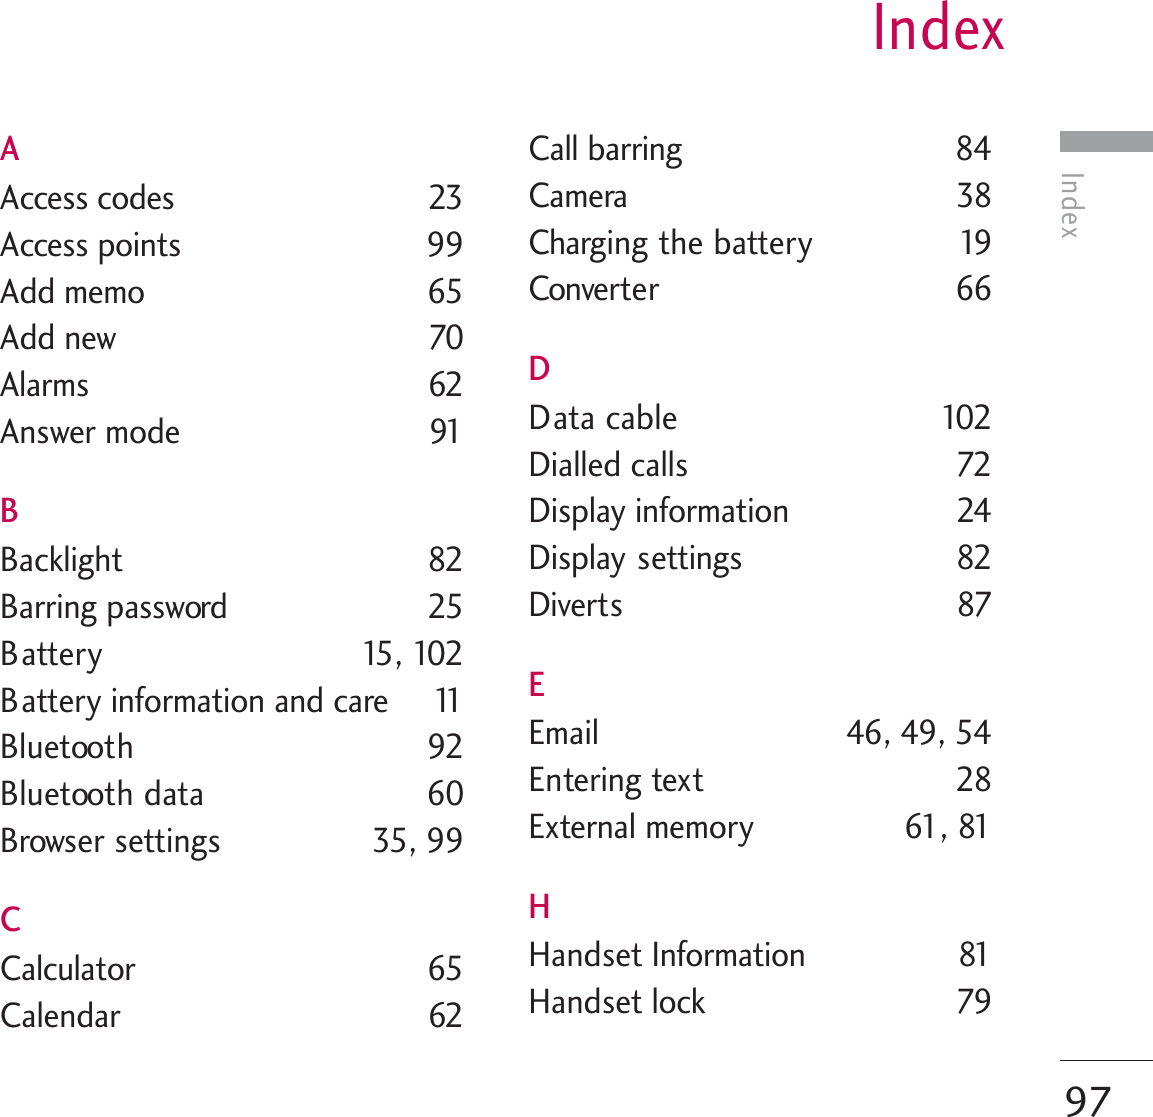 IndexIndex97AAccess codes  23Access points  99Add memo  65Add new  70Alarms 62Answer mode  91BBacklight 82Barring password  25Battery 15, 102Battery information and care  11Bluetooth 92Bluetooth data 60Browser settings  35, 99CCalculator 65Calendar 62Call barring  84Camera 38Charging the battery  19Converter 66DData cable  102Dialled calls  72Display information  24Display settings 82Diverts 87EEmail  46, 49, 54Entering text  28External memory  61, 81HHandset Information 81Handset lock  79